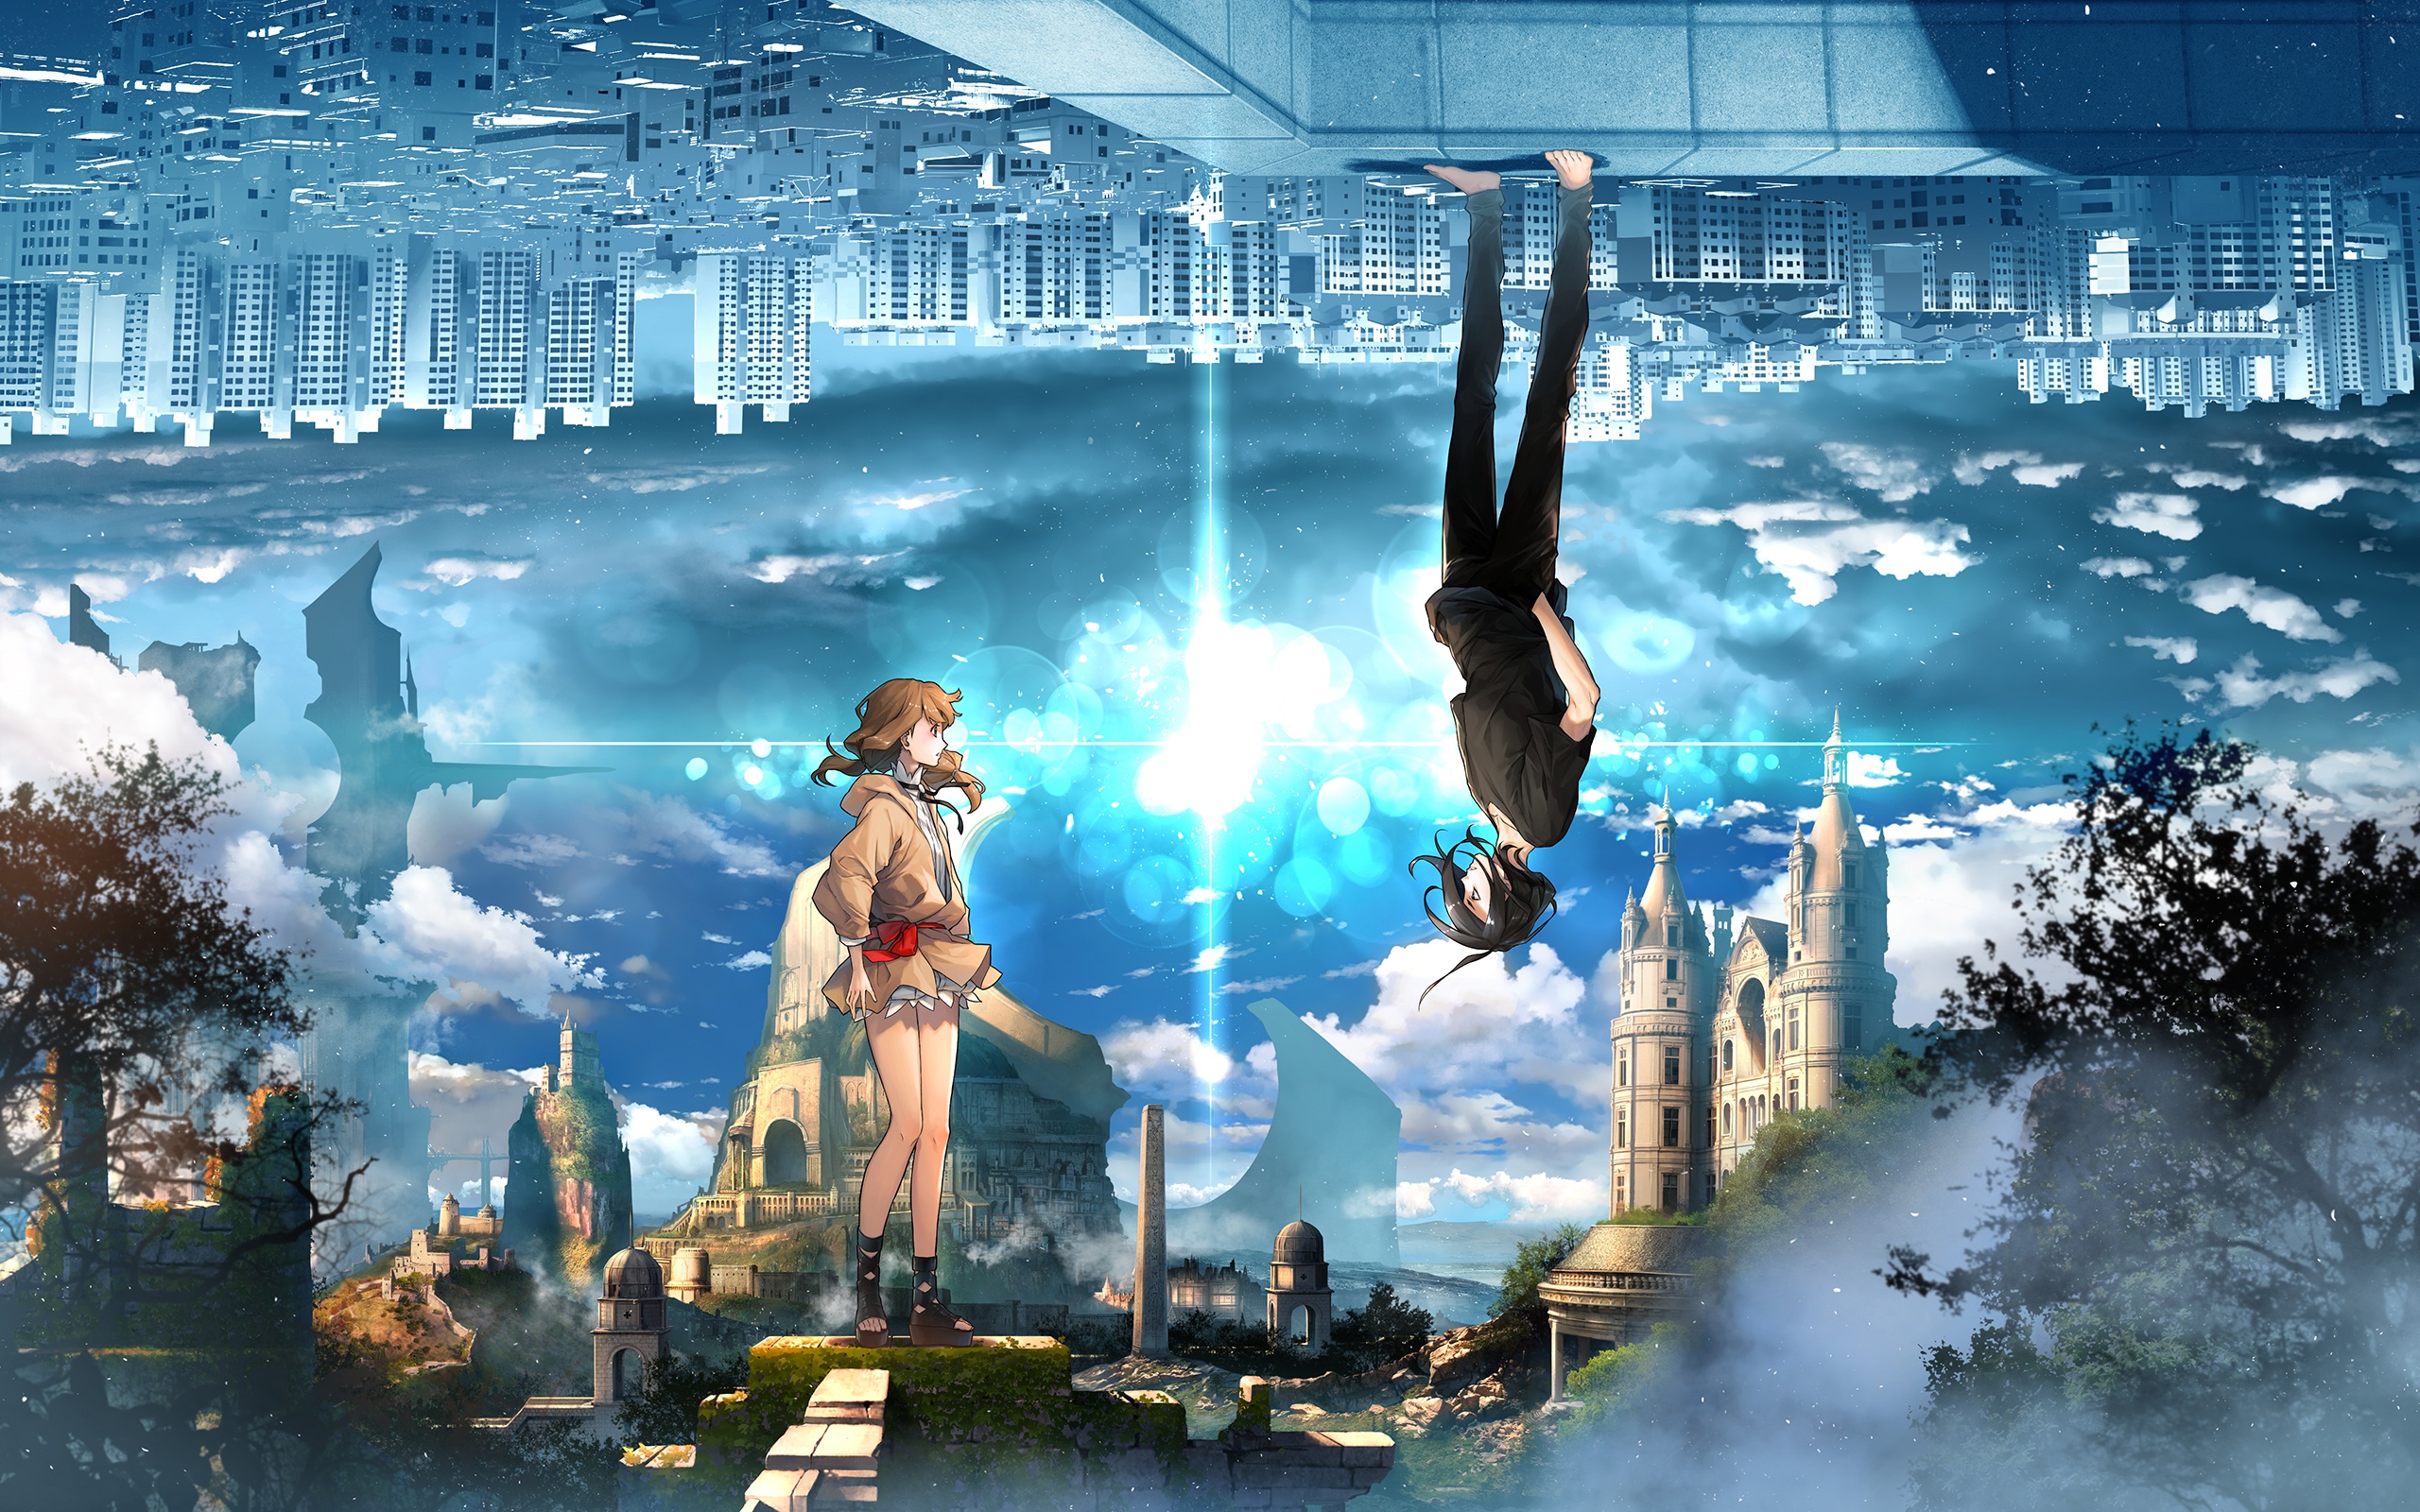 Her Summon Web Comic Anime Boys Anime Girls City Cityscape Upside Down Standing Castle Clouds Sky 2560x1600